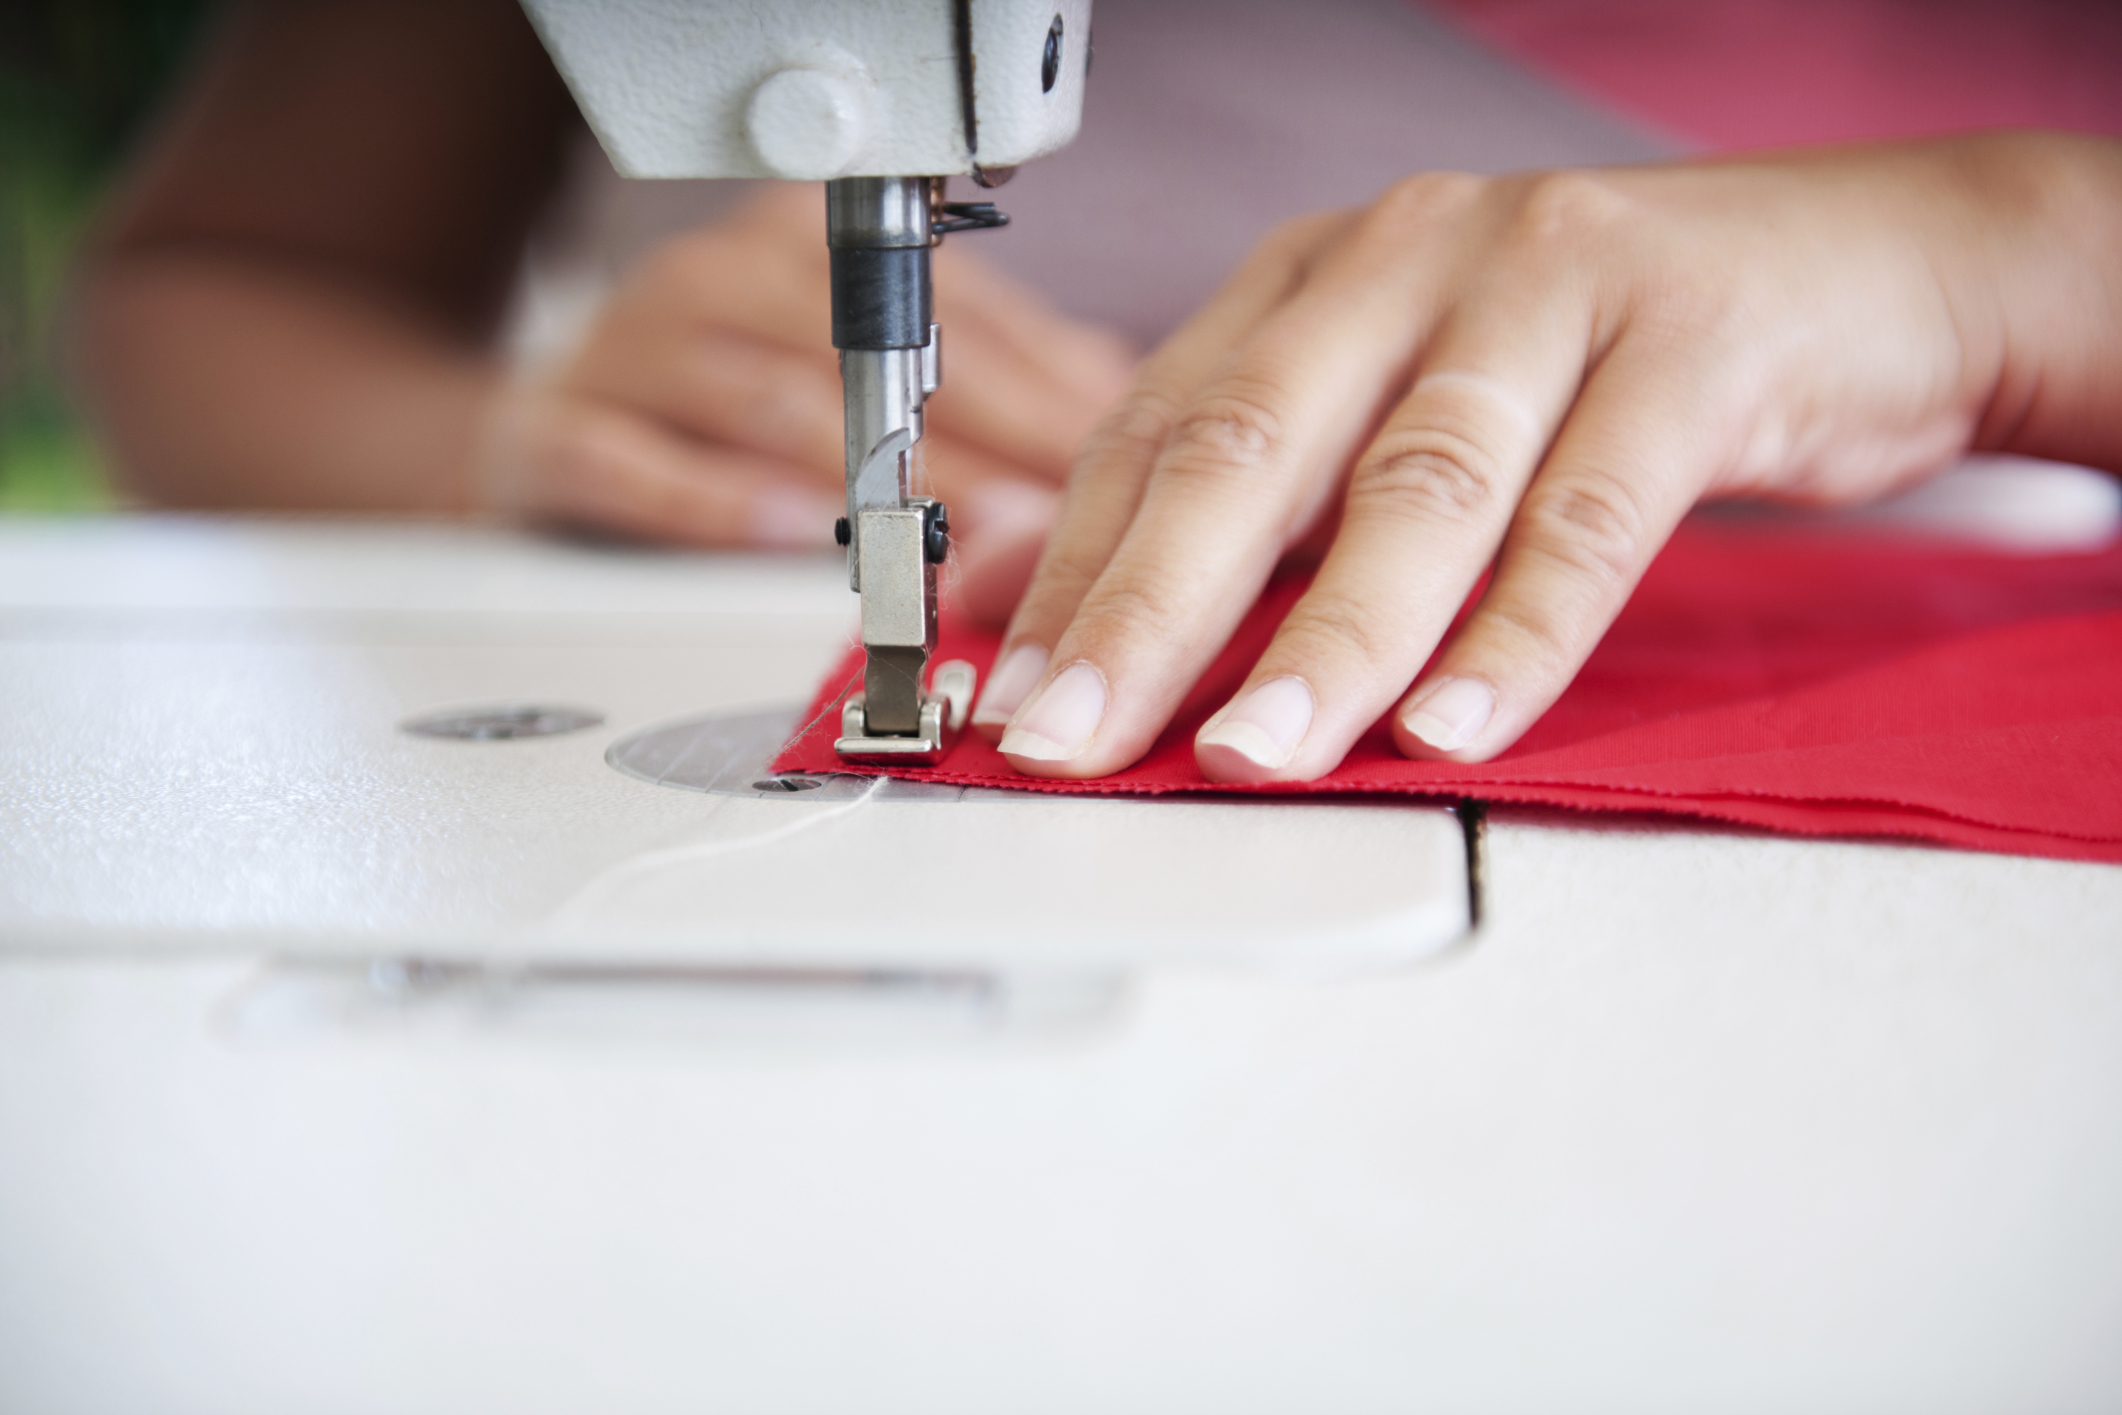 6 Reasons Your Sewing Machine Isn't Catching The Bobbin Thread